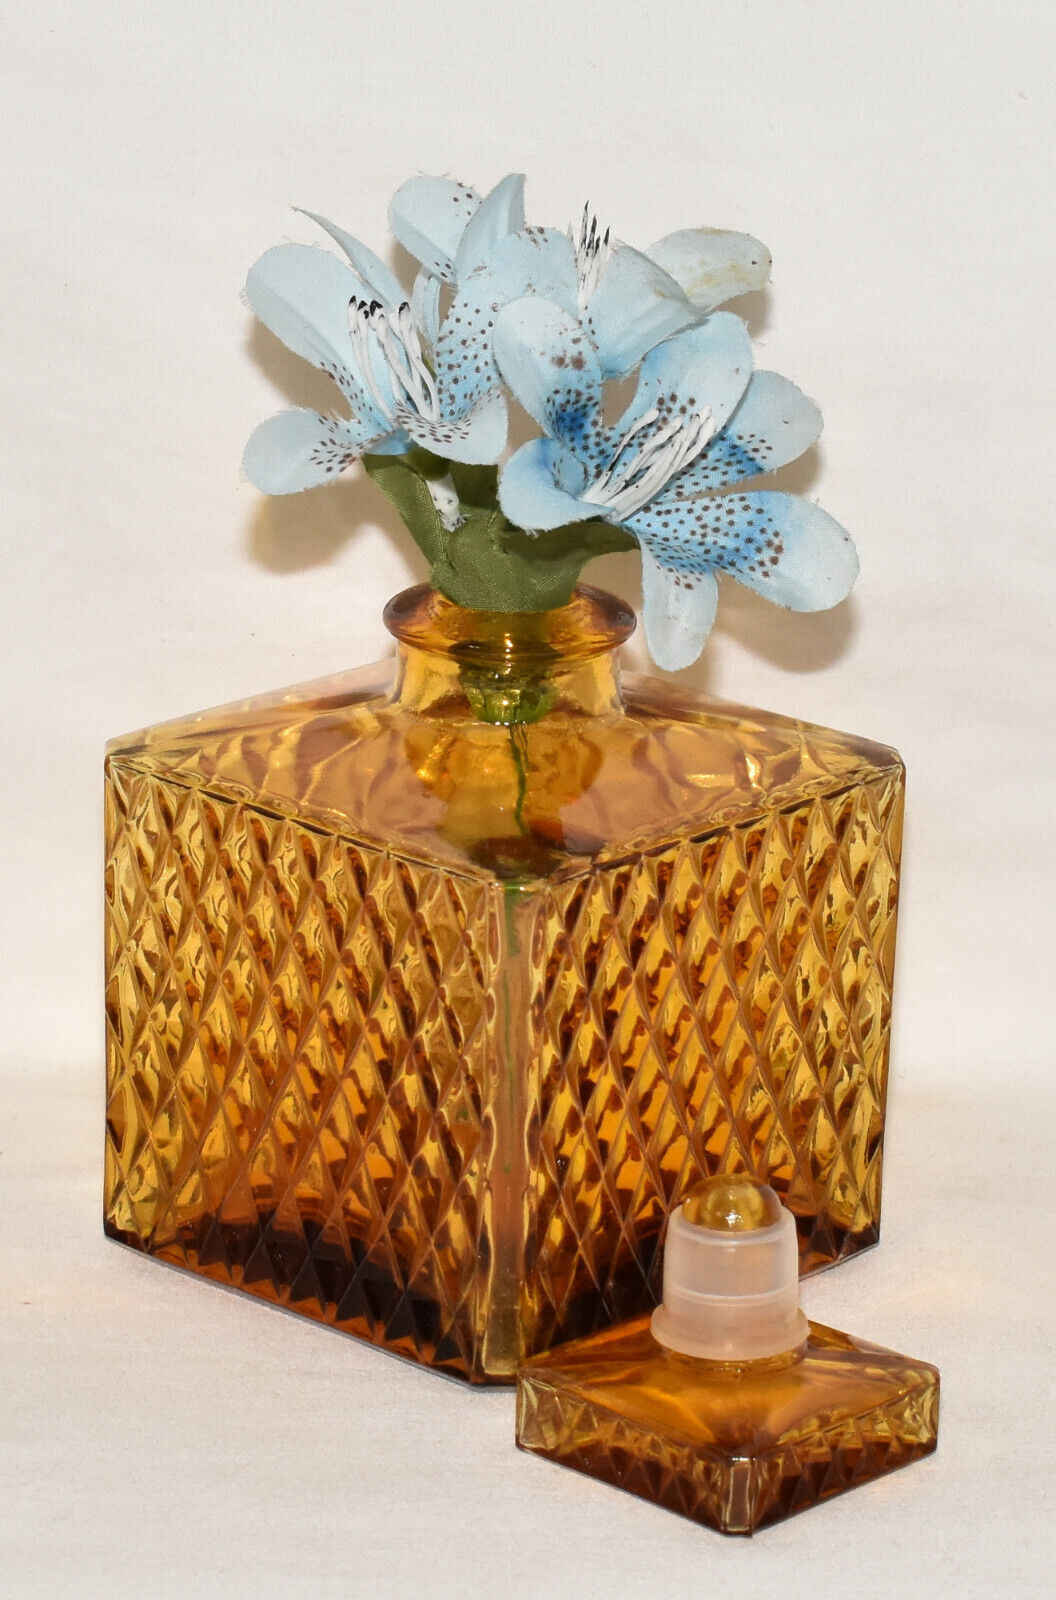 Amber Depression Glass Decanter Square Glass Lidded Decanter w Diamond Pattern